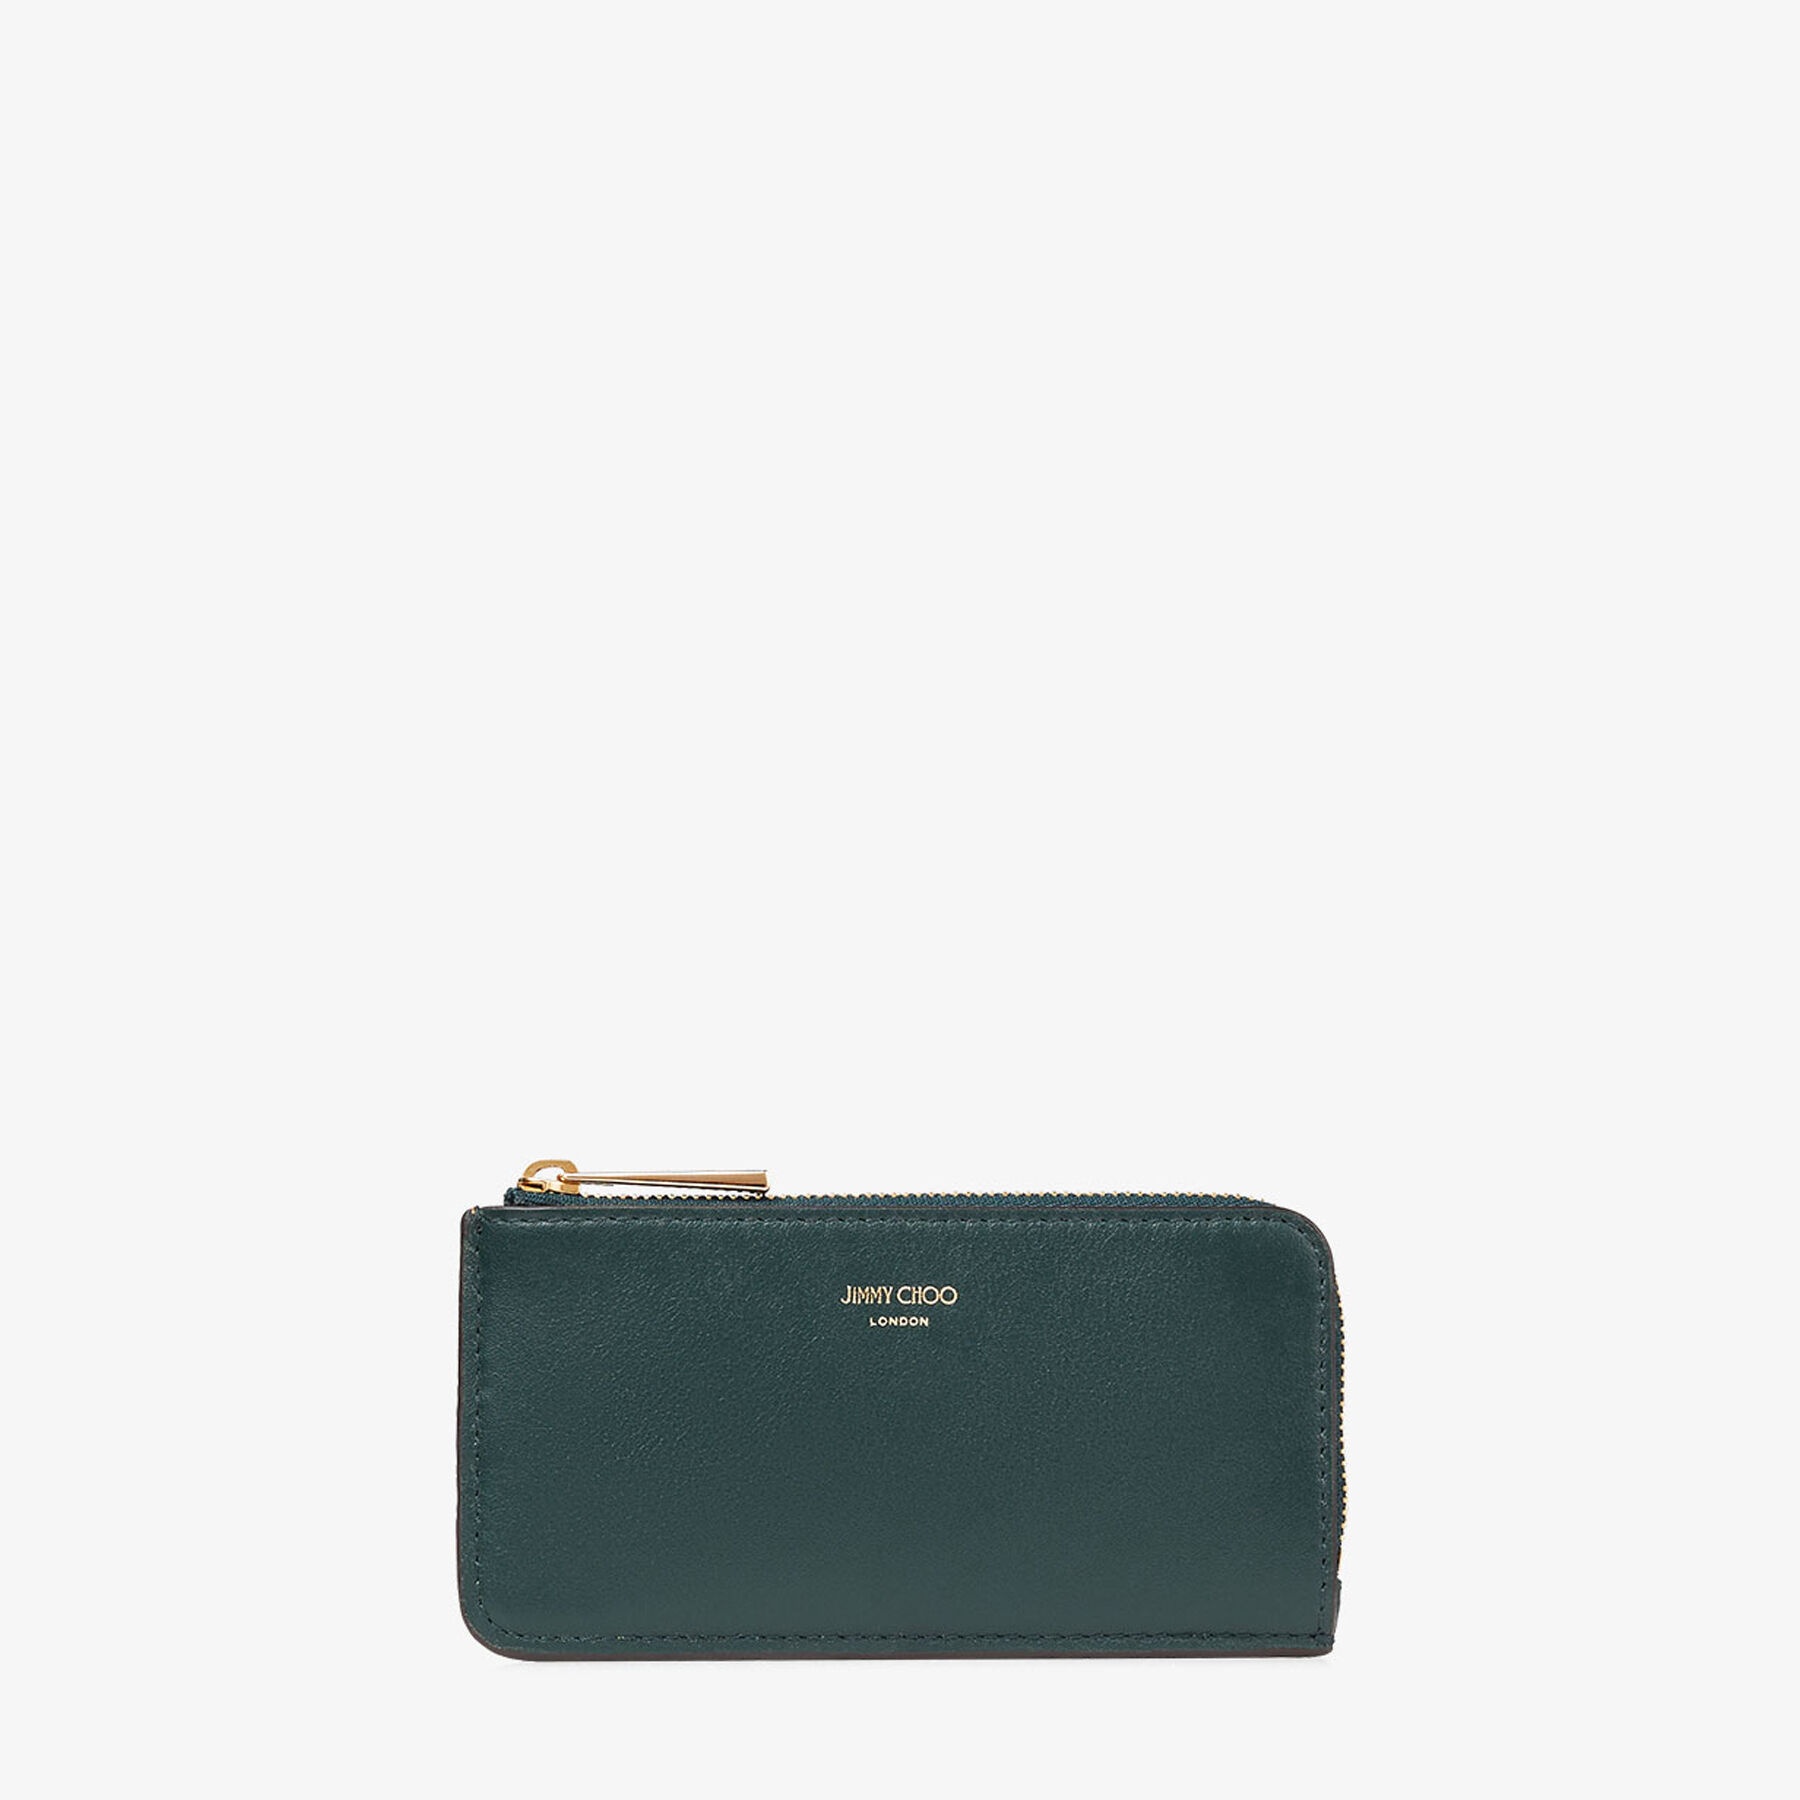 Lize-Z
Dark Green and Biscuit Bi-Colour Leather Wallet - 1